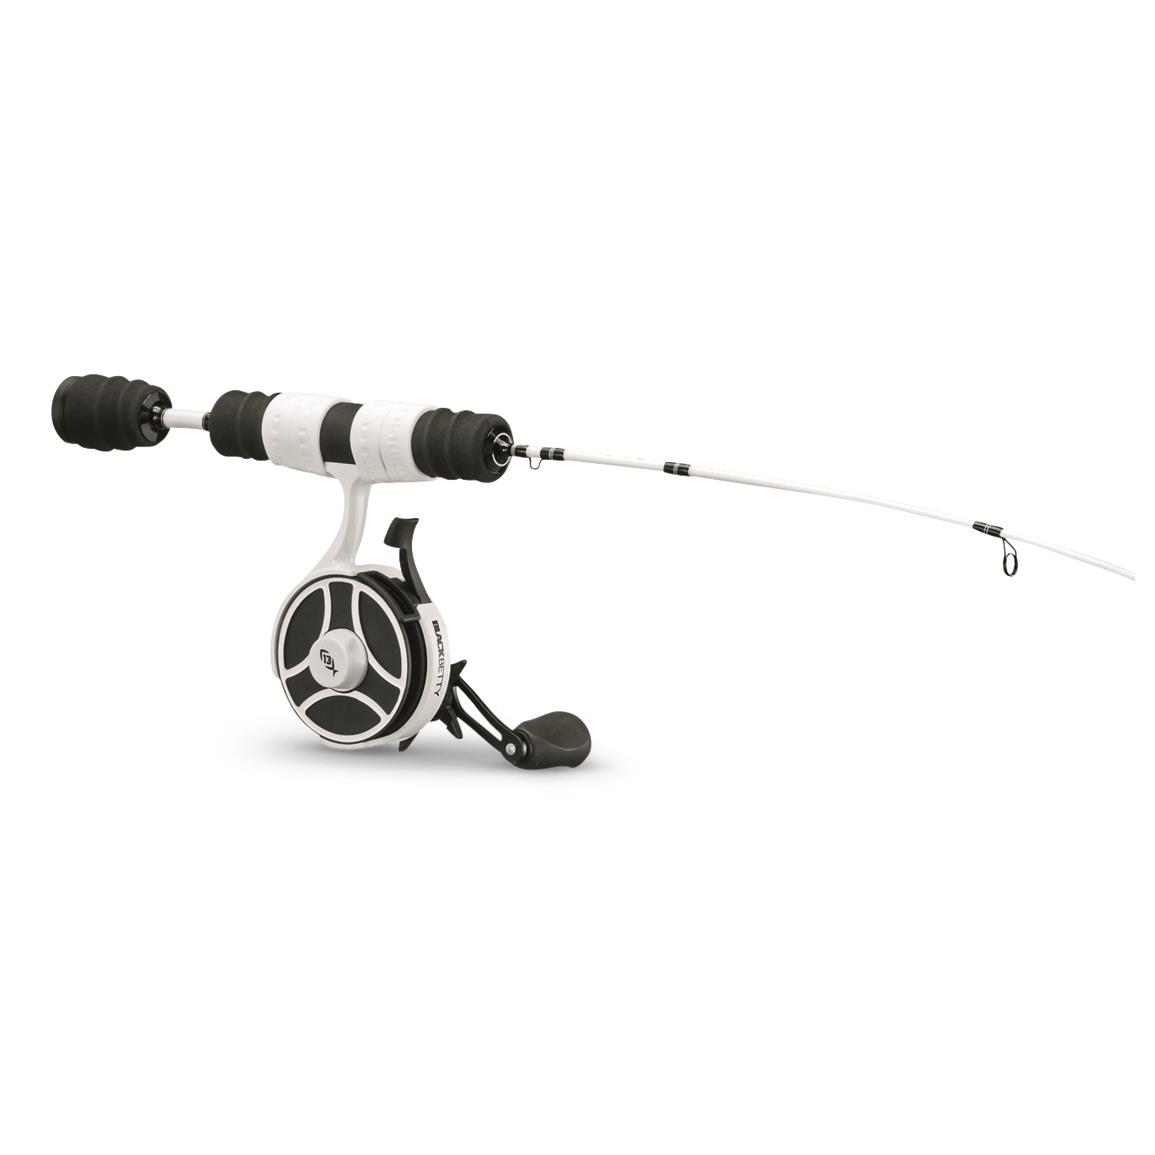 Frabill VYPR Inline Ice Fishing Combo, 27 Length, Light Action